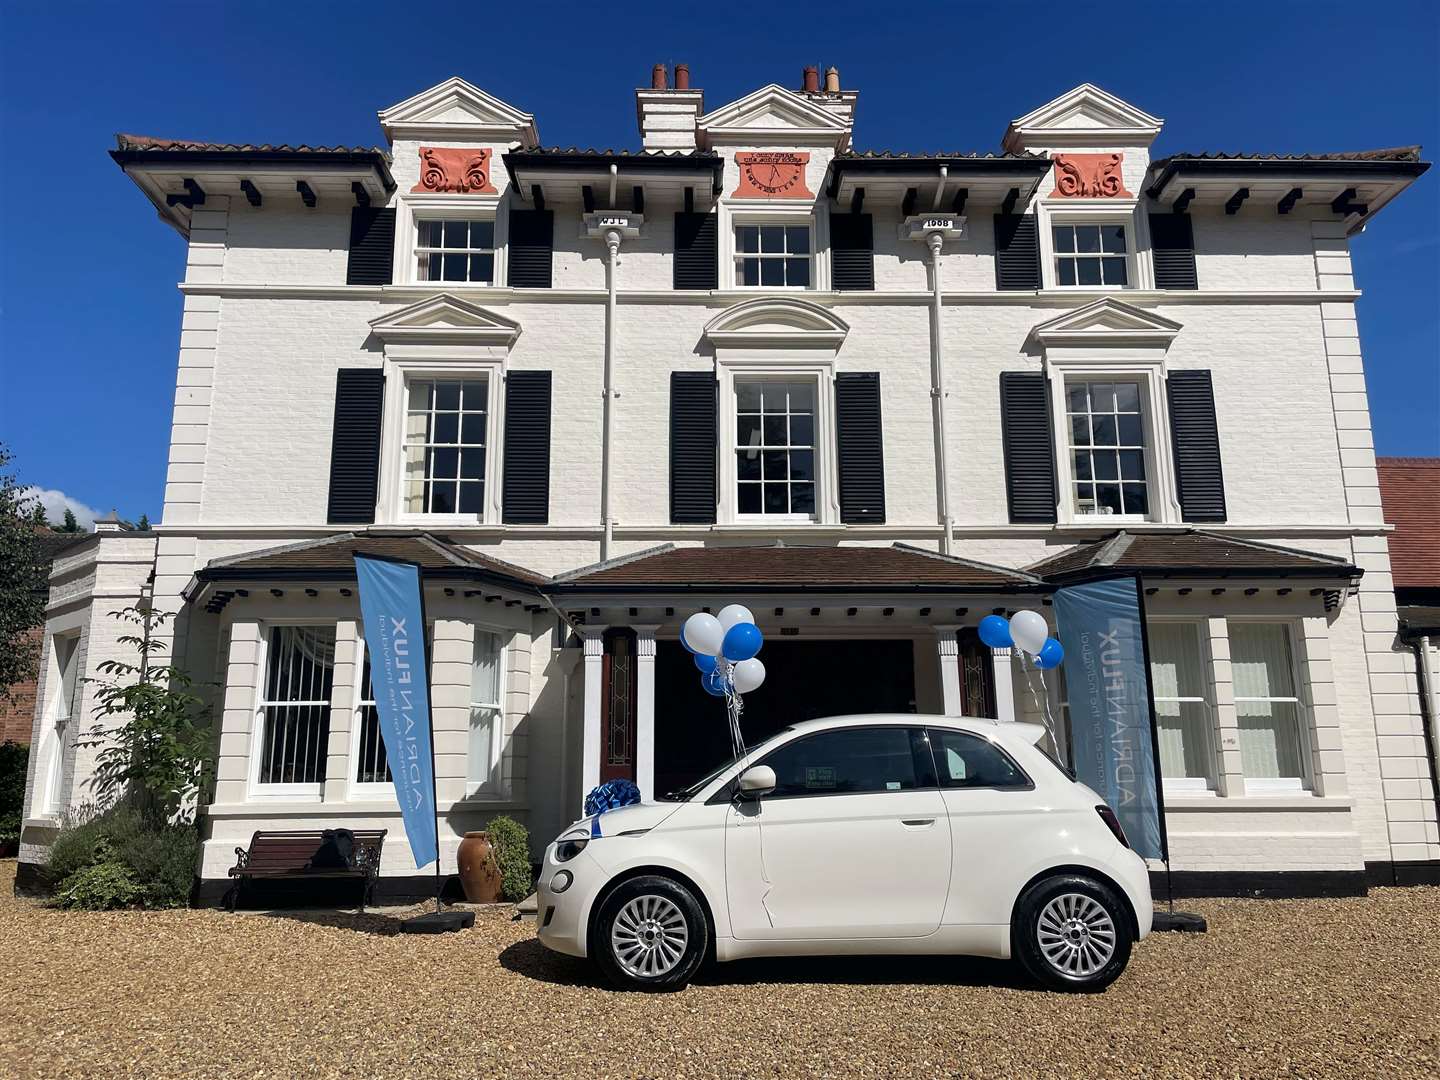 Grace was given this brand-new Fiat 500 courtesy of Adrian Flux